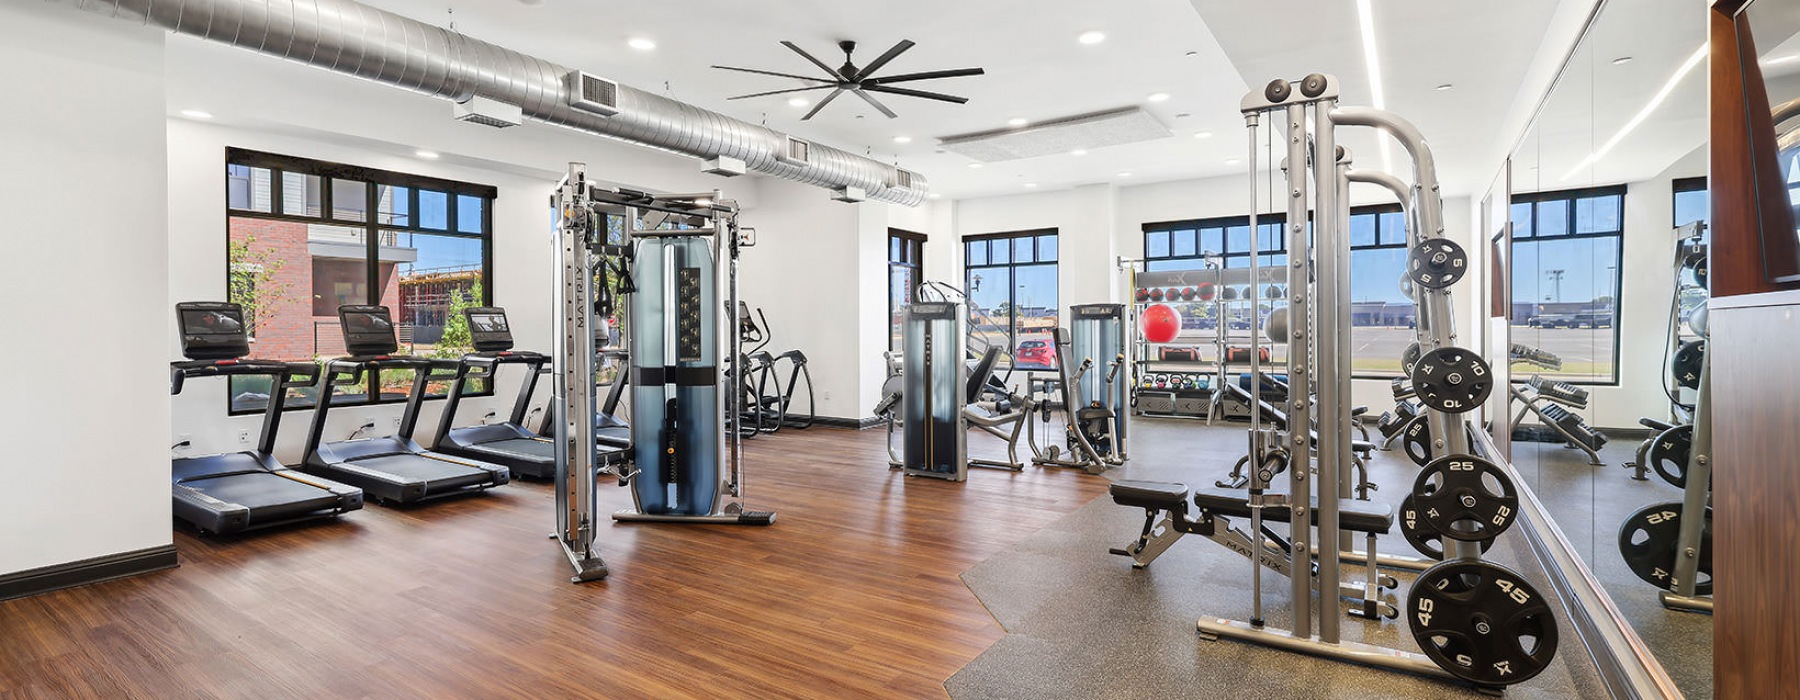 Spacious, well equipped fitness center at Metronome at MidCity